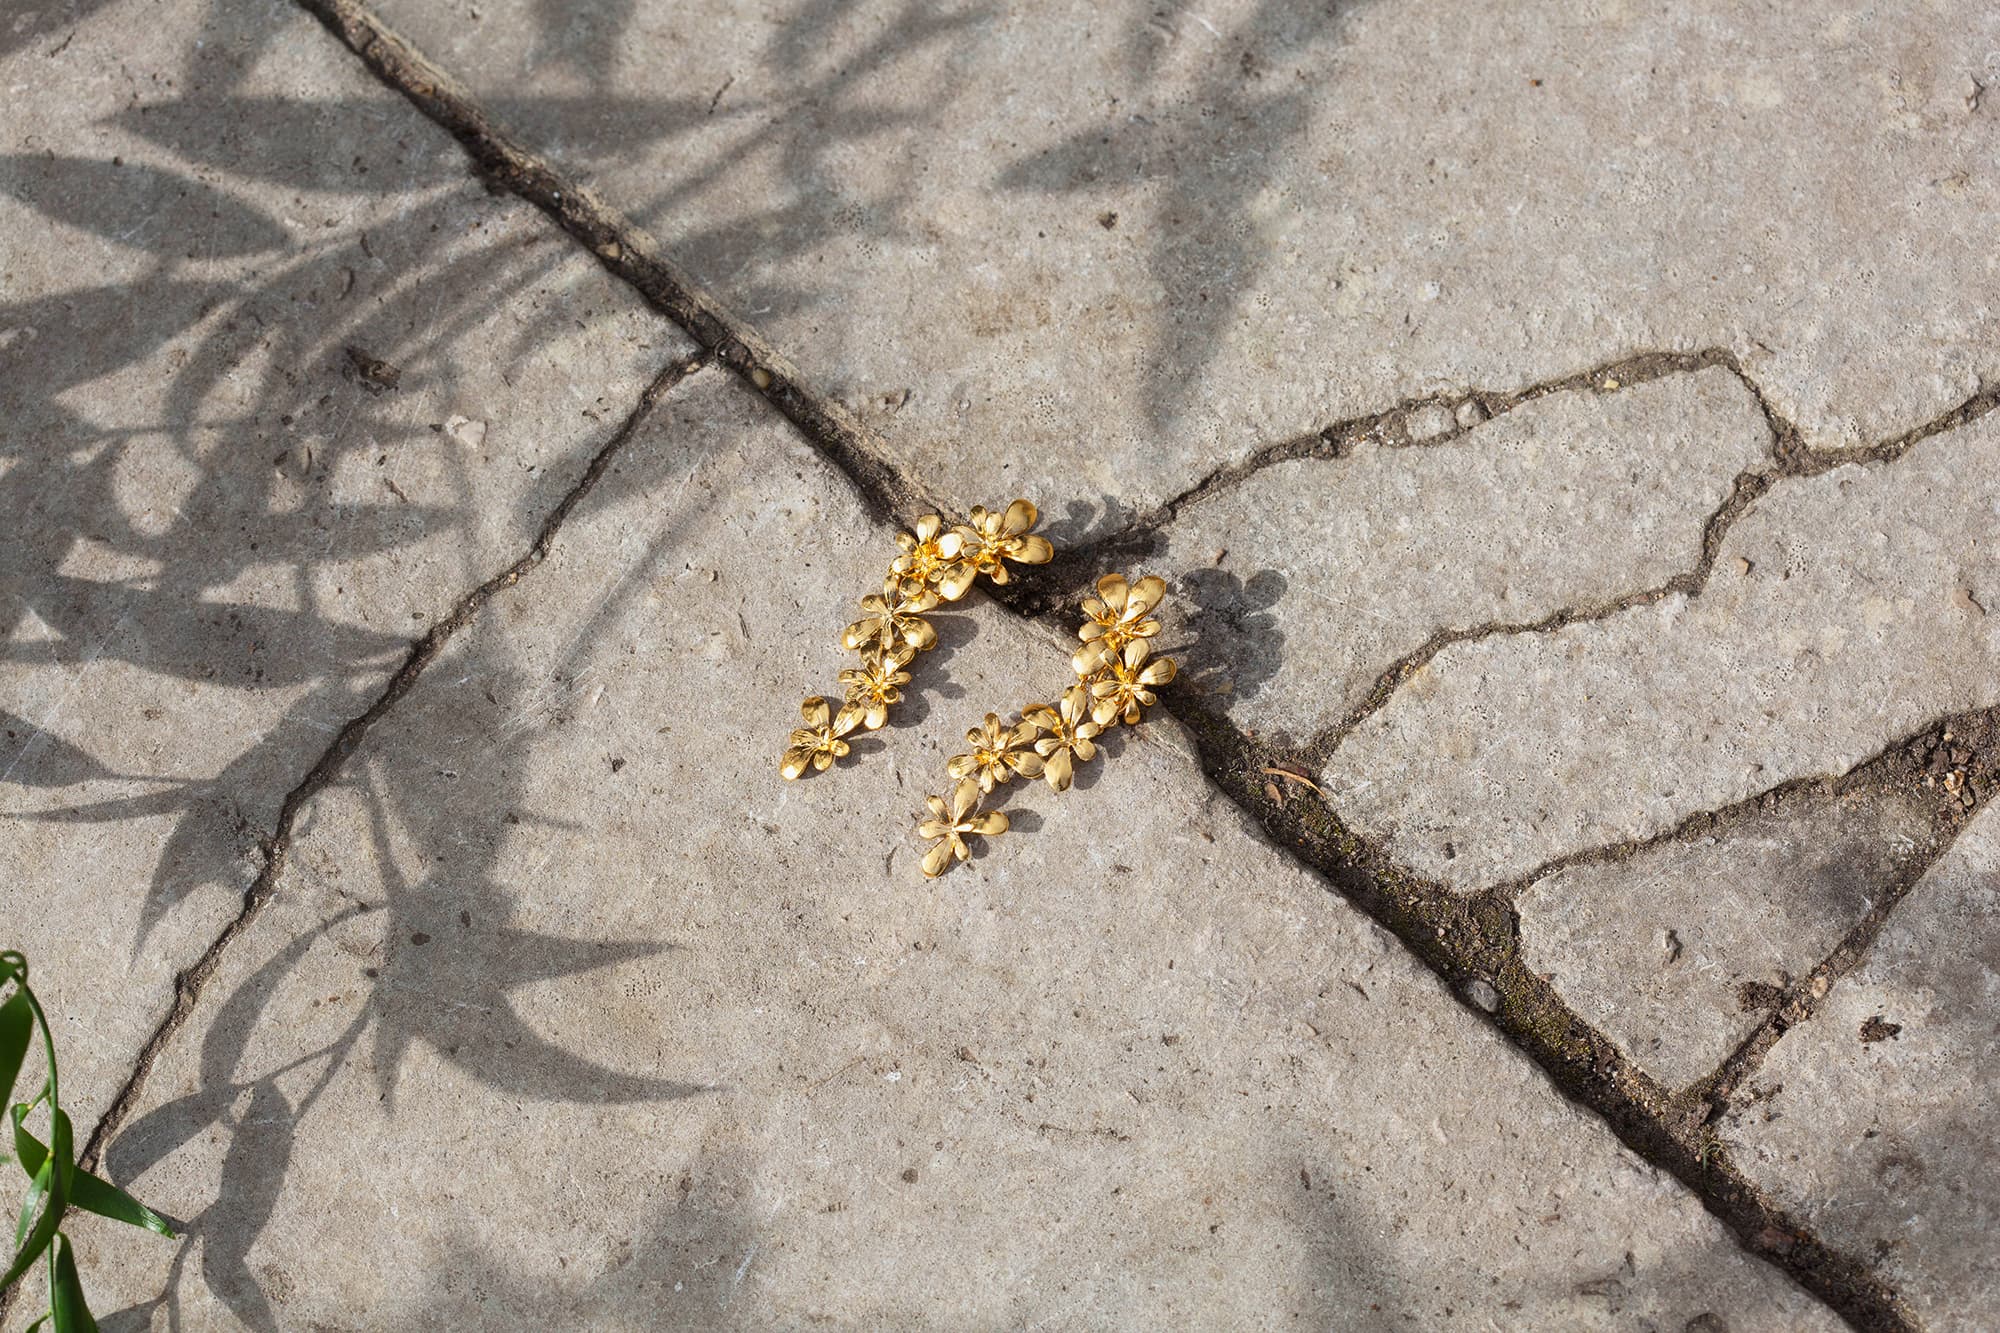 Large Rosette Flourish Drop Earrings Silver and 22ct Fairmined Gold Plate in pavement crack